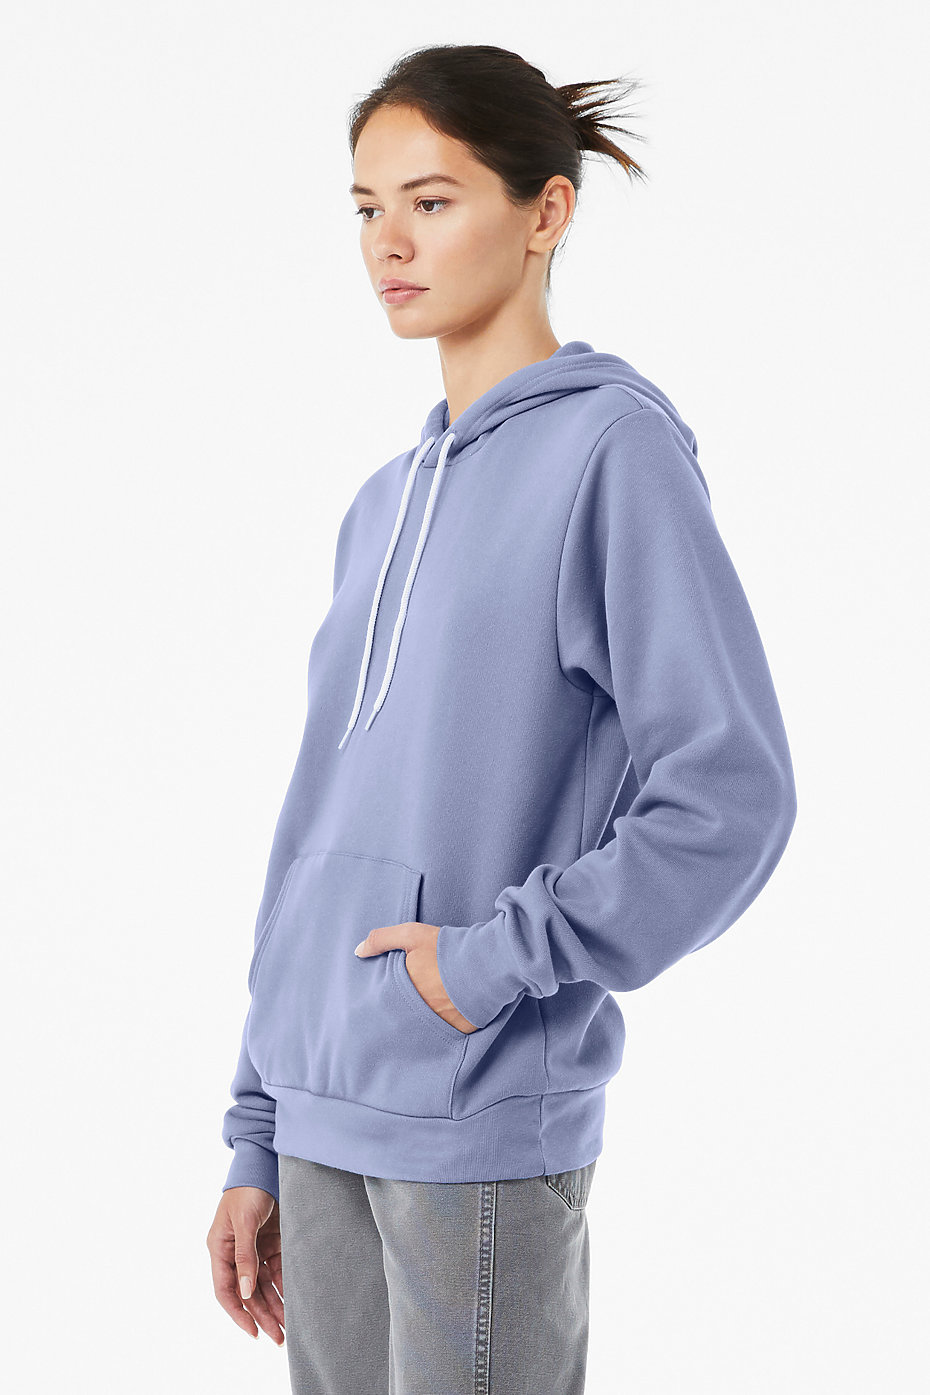 Women's Tracksuit with Hood Navy Blue Bolf 0002